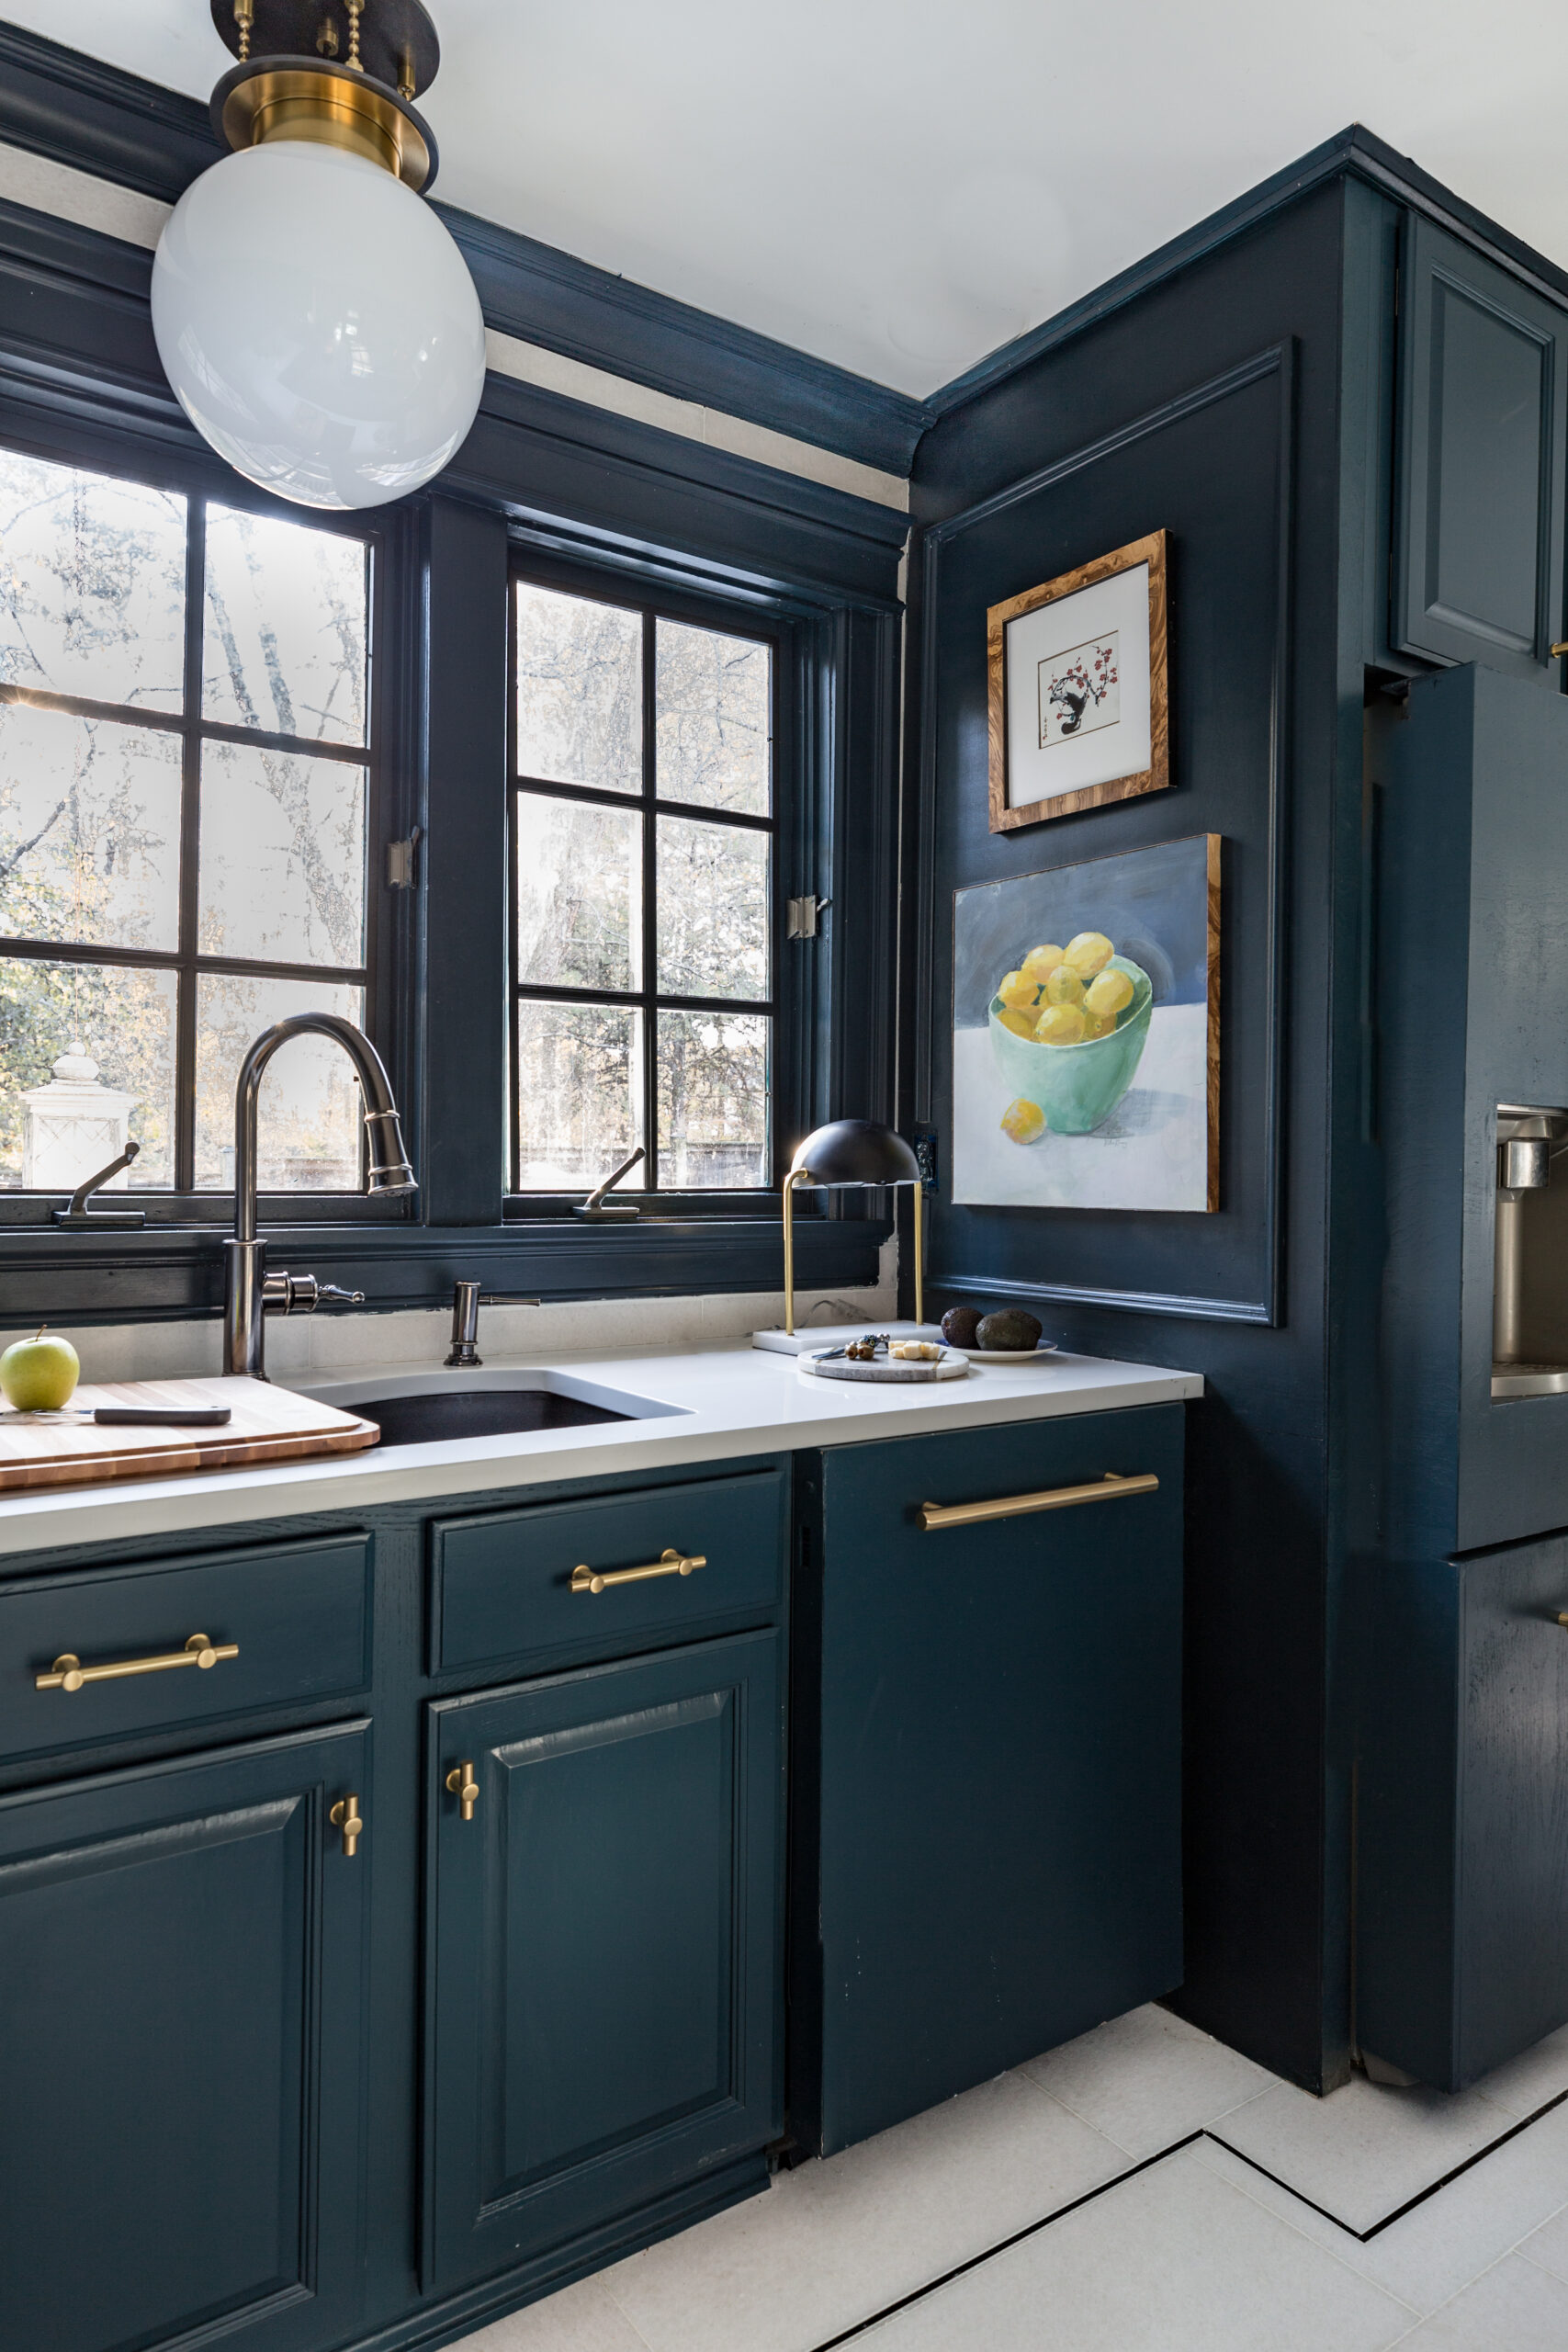 Check out this gorgeous blue kitchen with elkay kitchen sink and faucet